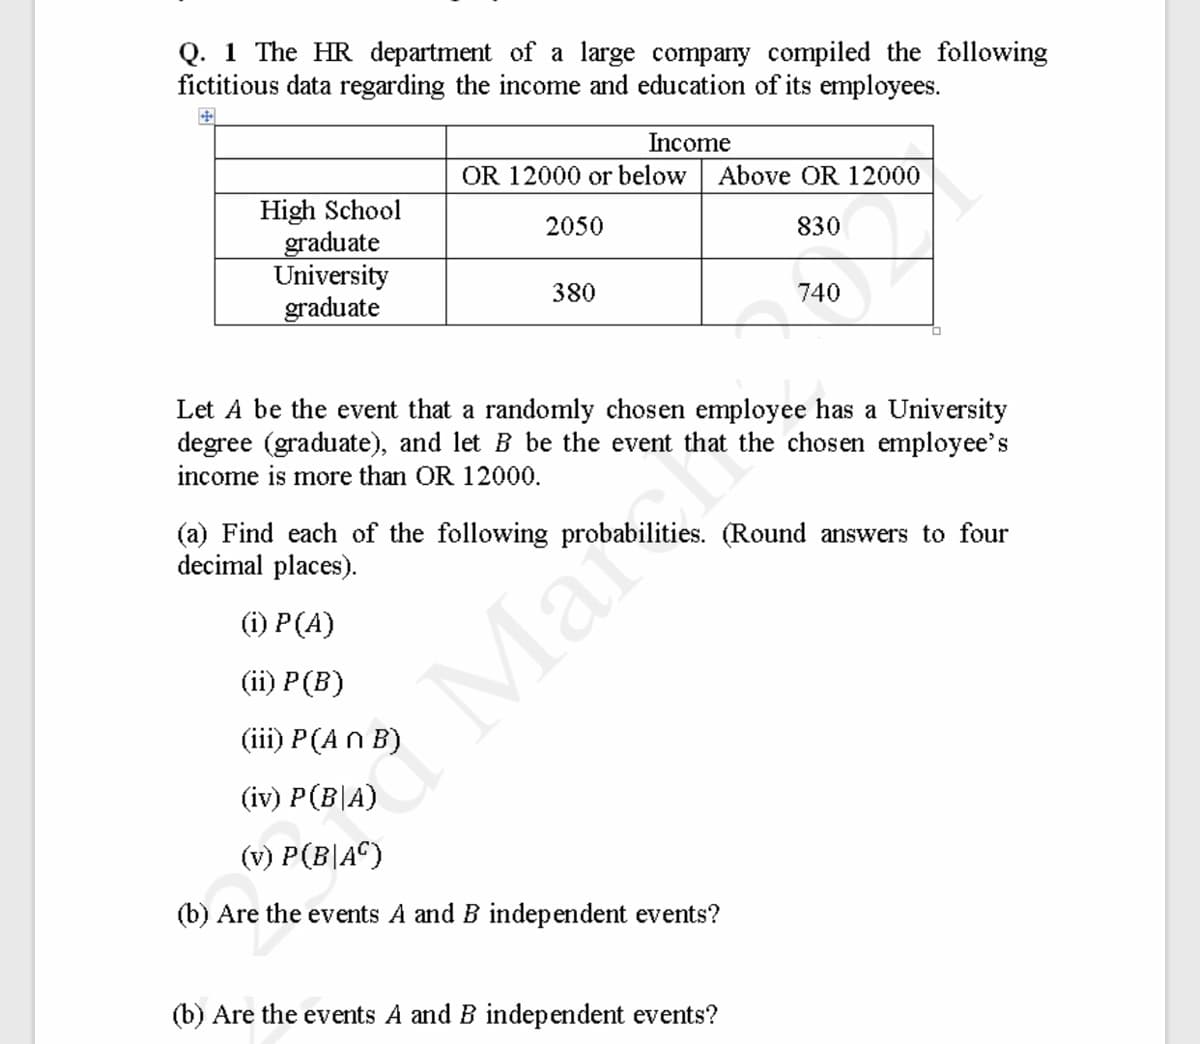 Q. 1 The HR department of a large company compiled the following
fictitious data regarding the income and education of its employees.
Income
OR 12000 or below
Above OR 12000
High School
graduate
University
graduate
2050
830
380
740
Let A be the event that a randomly chosen employee has a University
degree (graduate), and let B be the event that the chosen employee's
income is more than OR 12000.
(a) Find each of the following probabilities. (Round answers to four
decimal places).
() Р(4)
Mara
(ii) P (B)
(iii) P(An B)
(iv) P(B|A)
(v) P(B|A^)
(b) Are the events A and B independent events?
(b) Are the events A and B independent events?
